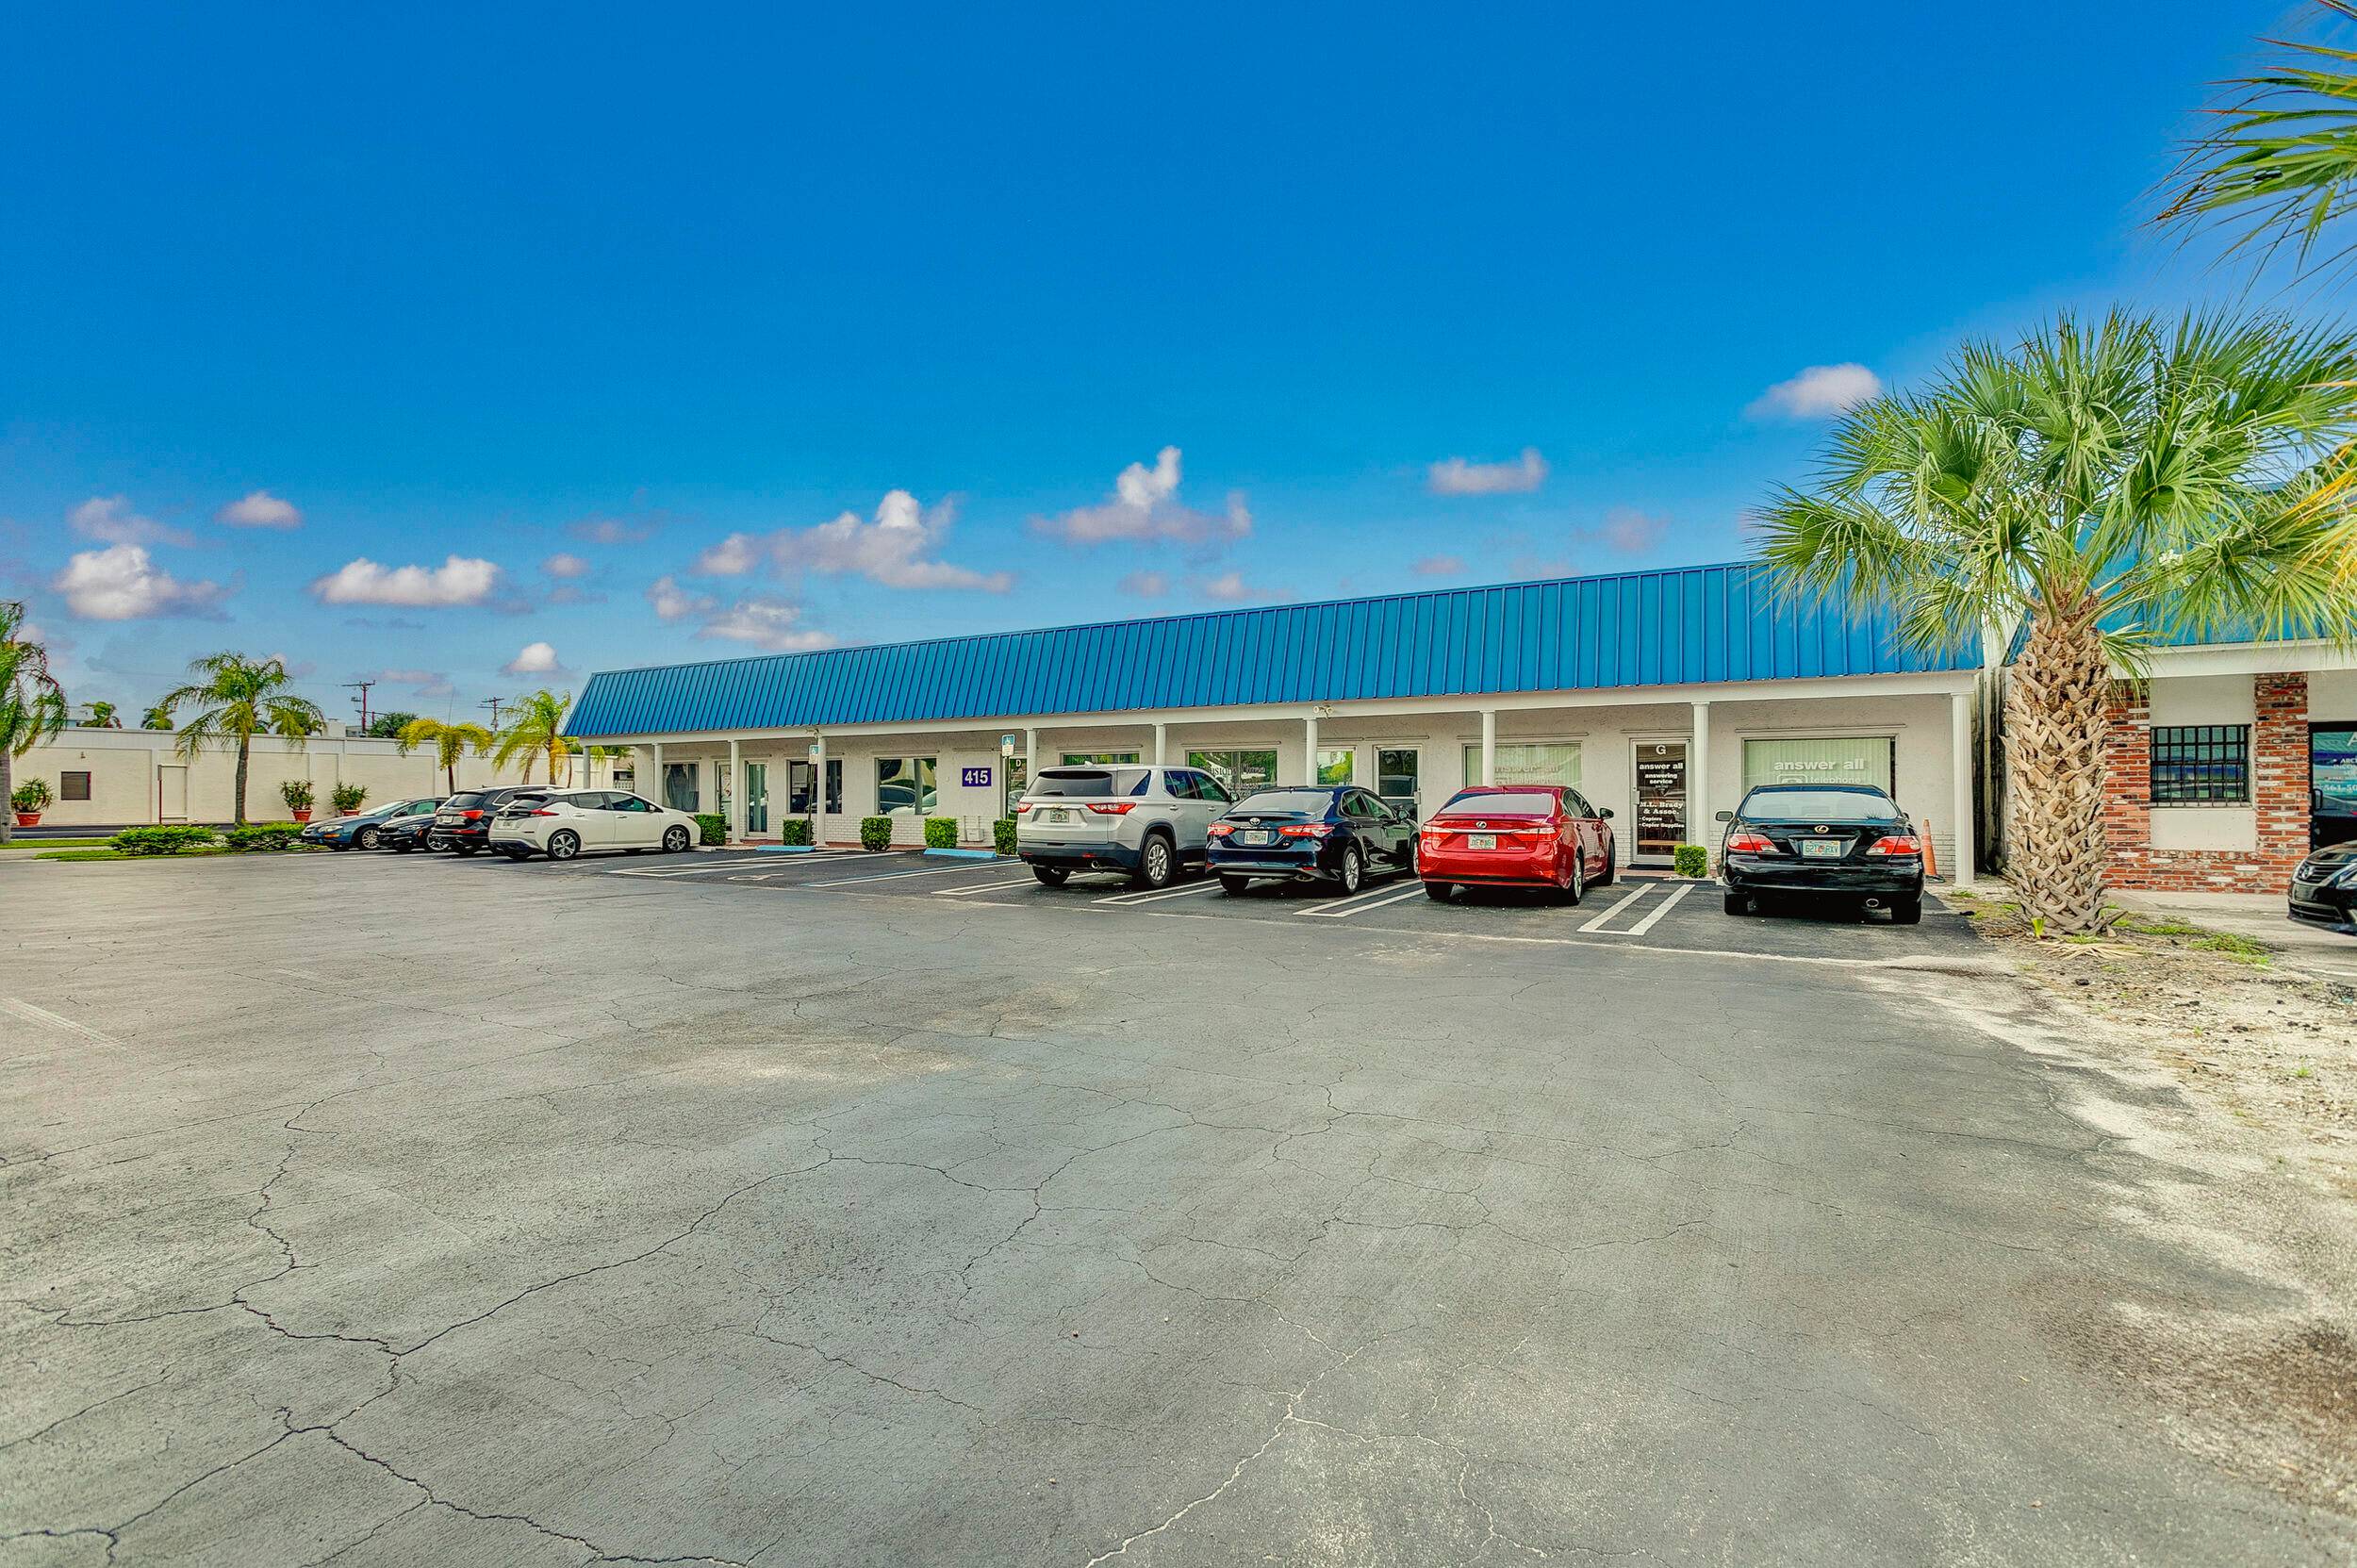 OPPORTUNITY to purchase CBS construction, multi tenant retail center with AIR RIGHTS.